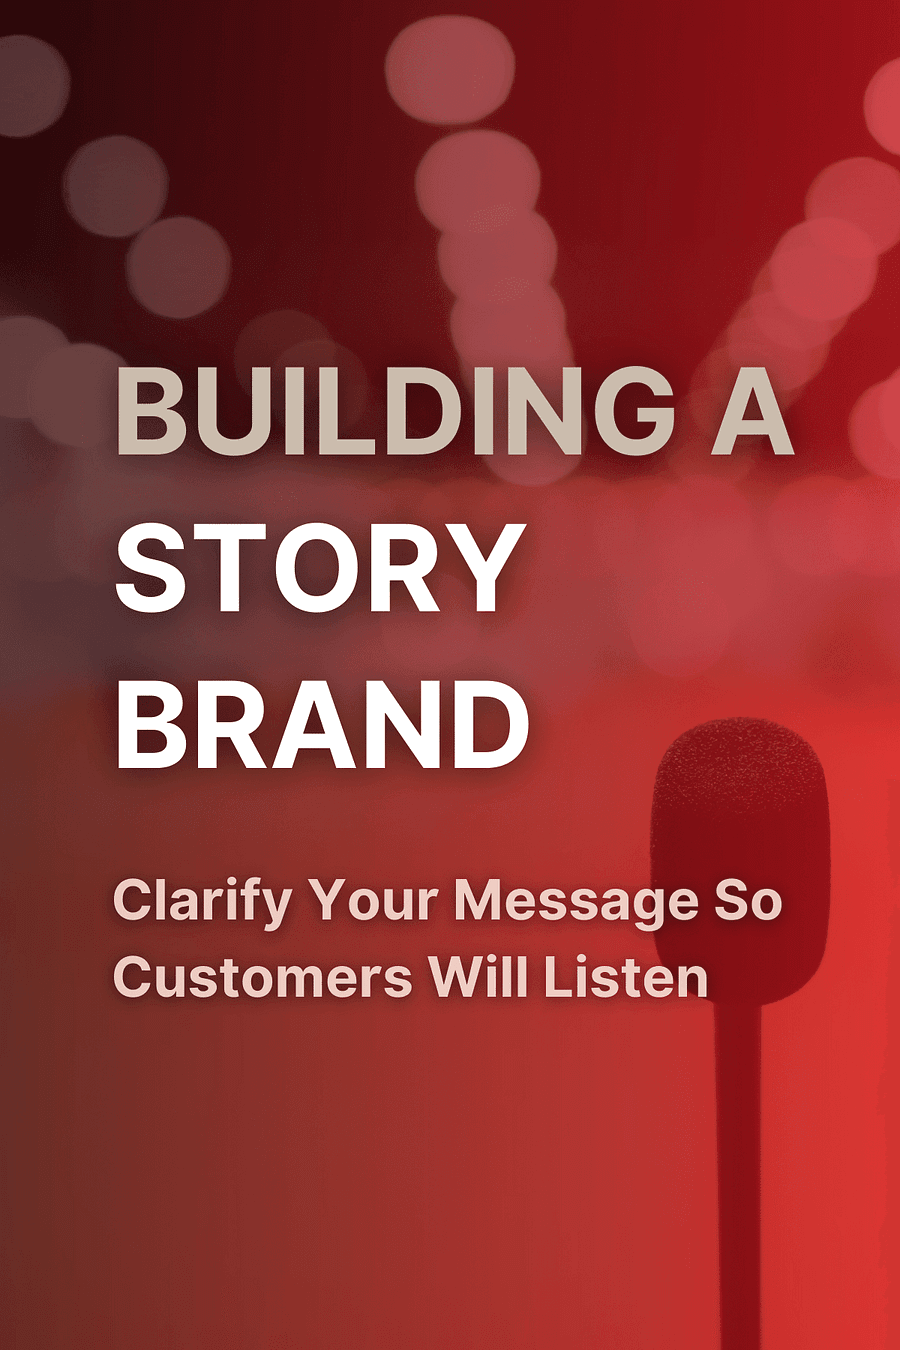 Building a StoryBrand by Donald Miller - Book Summary